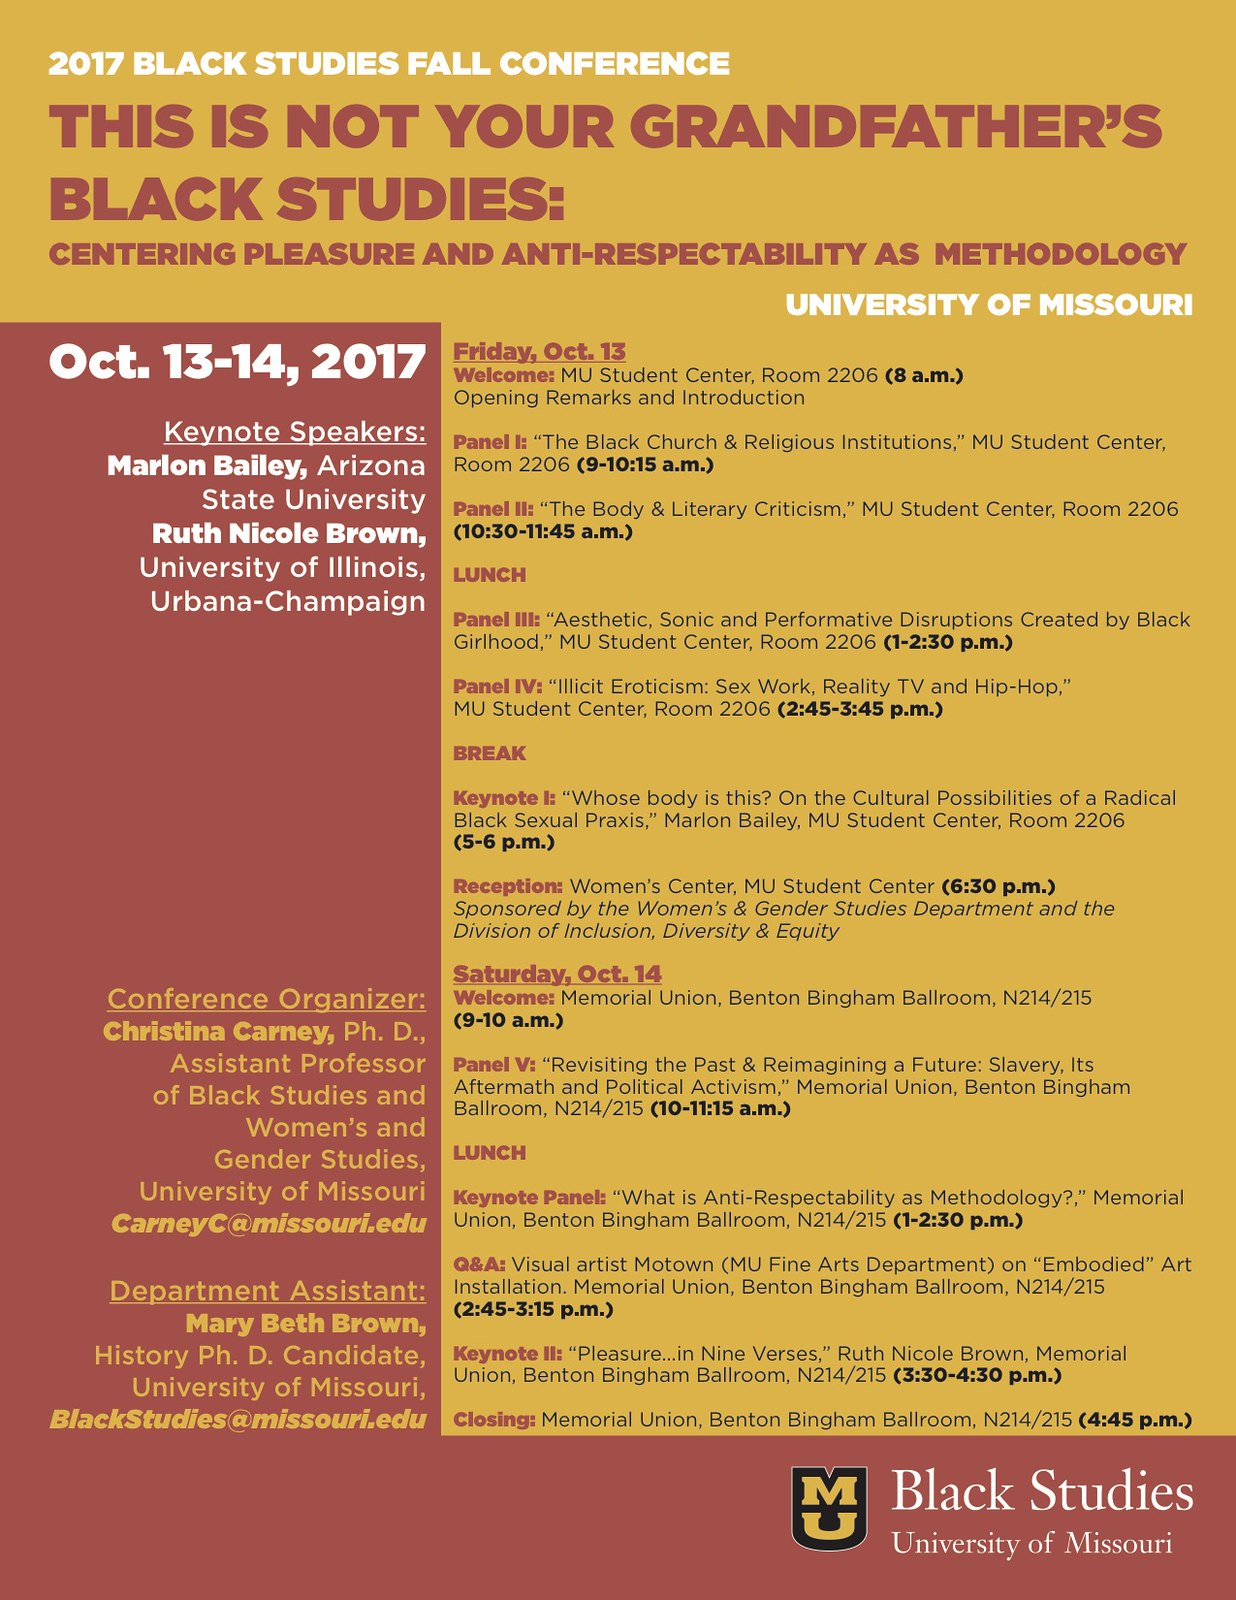 Black Studies Annual Fall Conference 2017 "This Is Not Your Grandfather's Black Studies: Centering Pleasure and Anti-Respectability as Methodology"